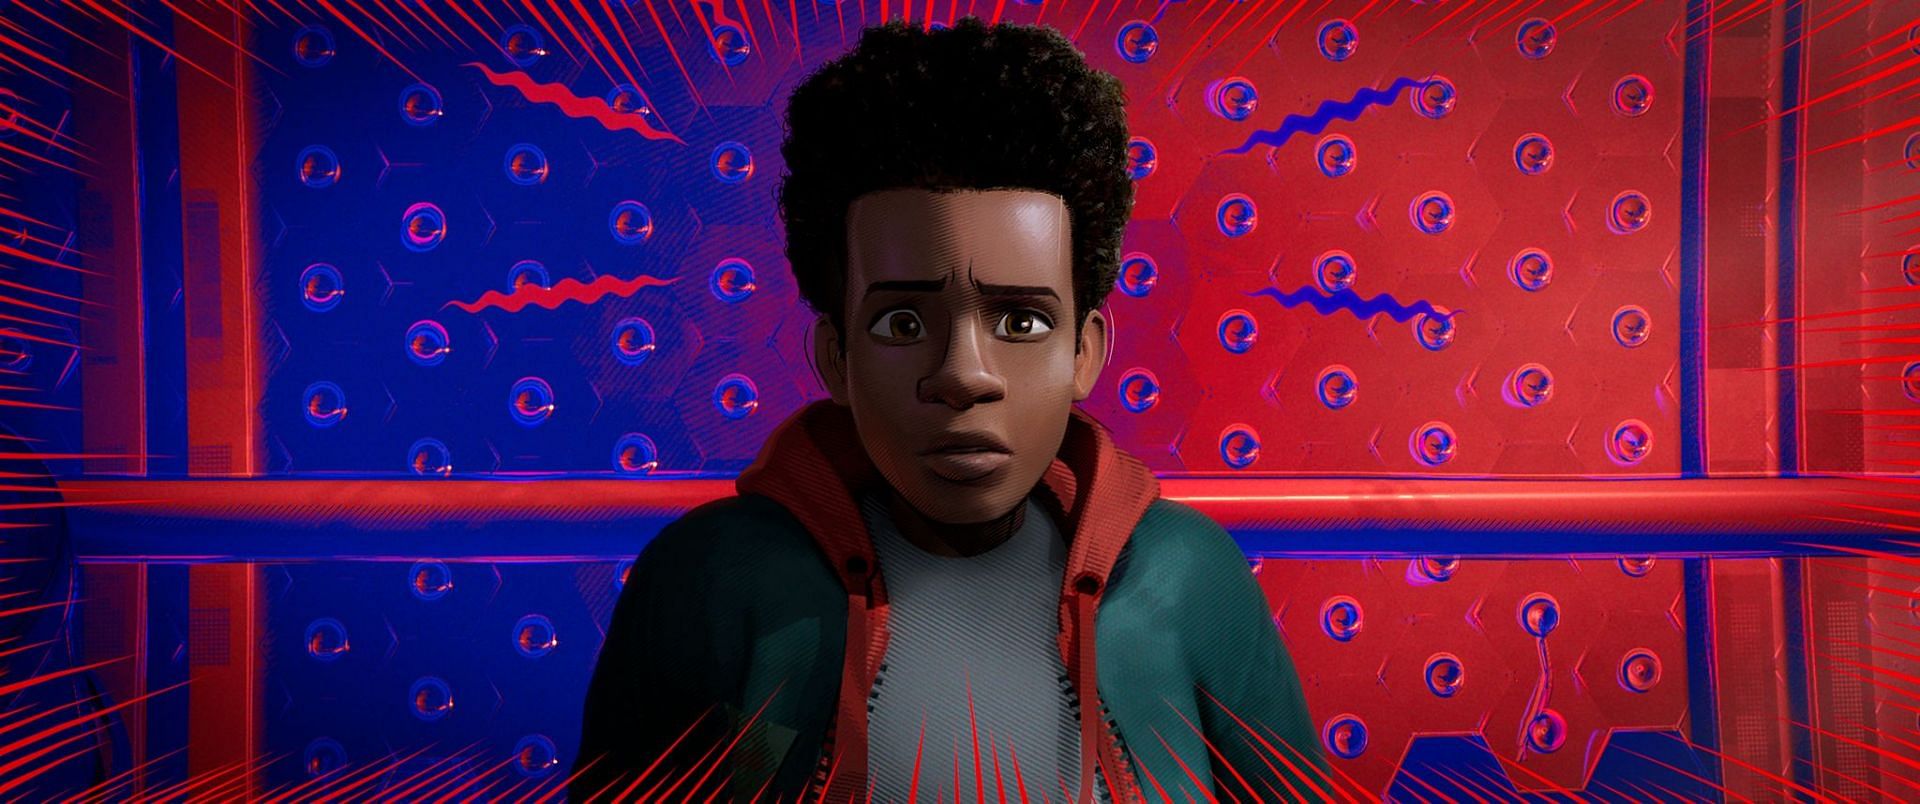 With powers similar to Peter Parker&#039;s, Miles Morales swings through New York City as the one and only web slinging superhero (Image via Sony Pictures)